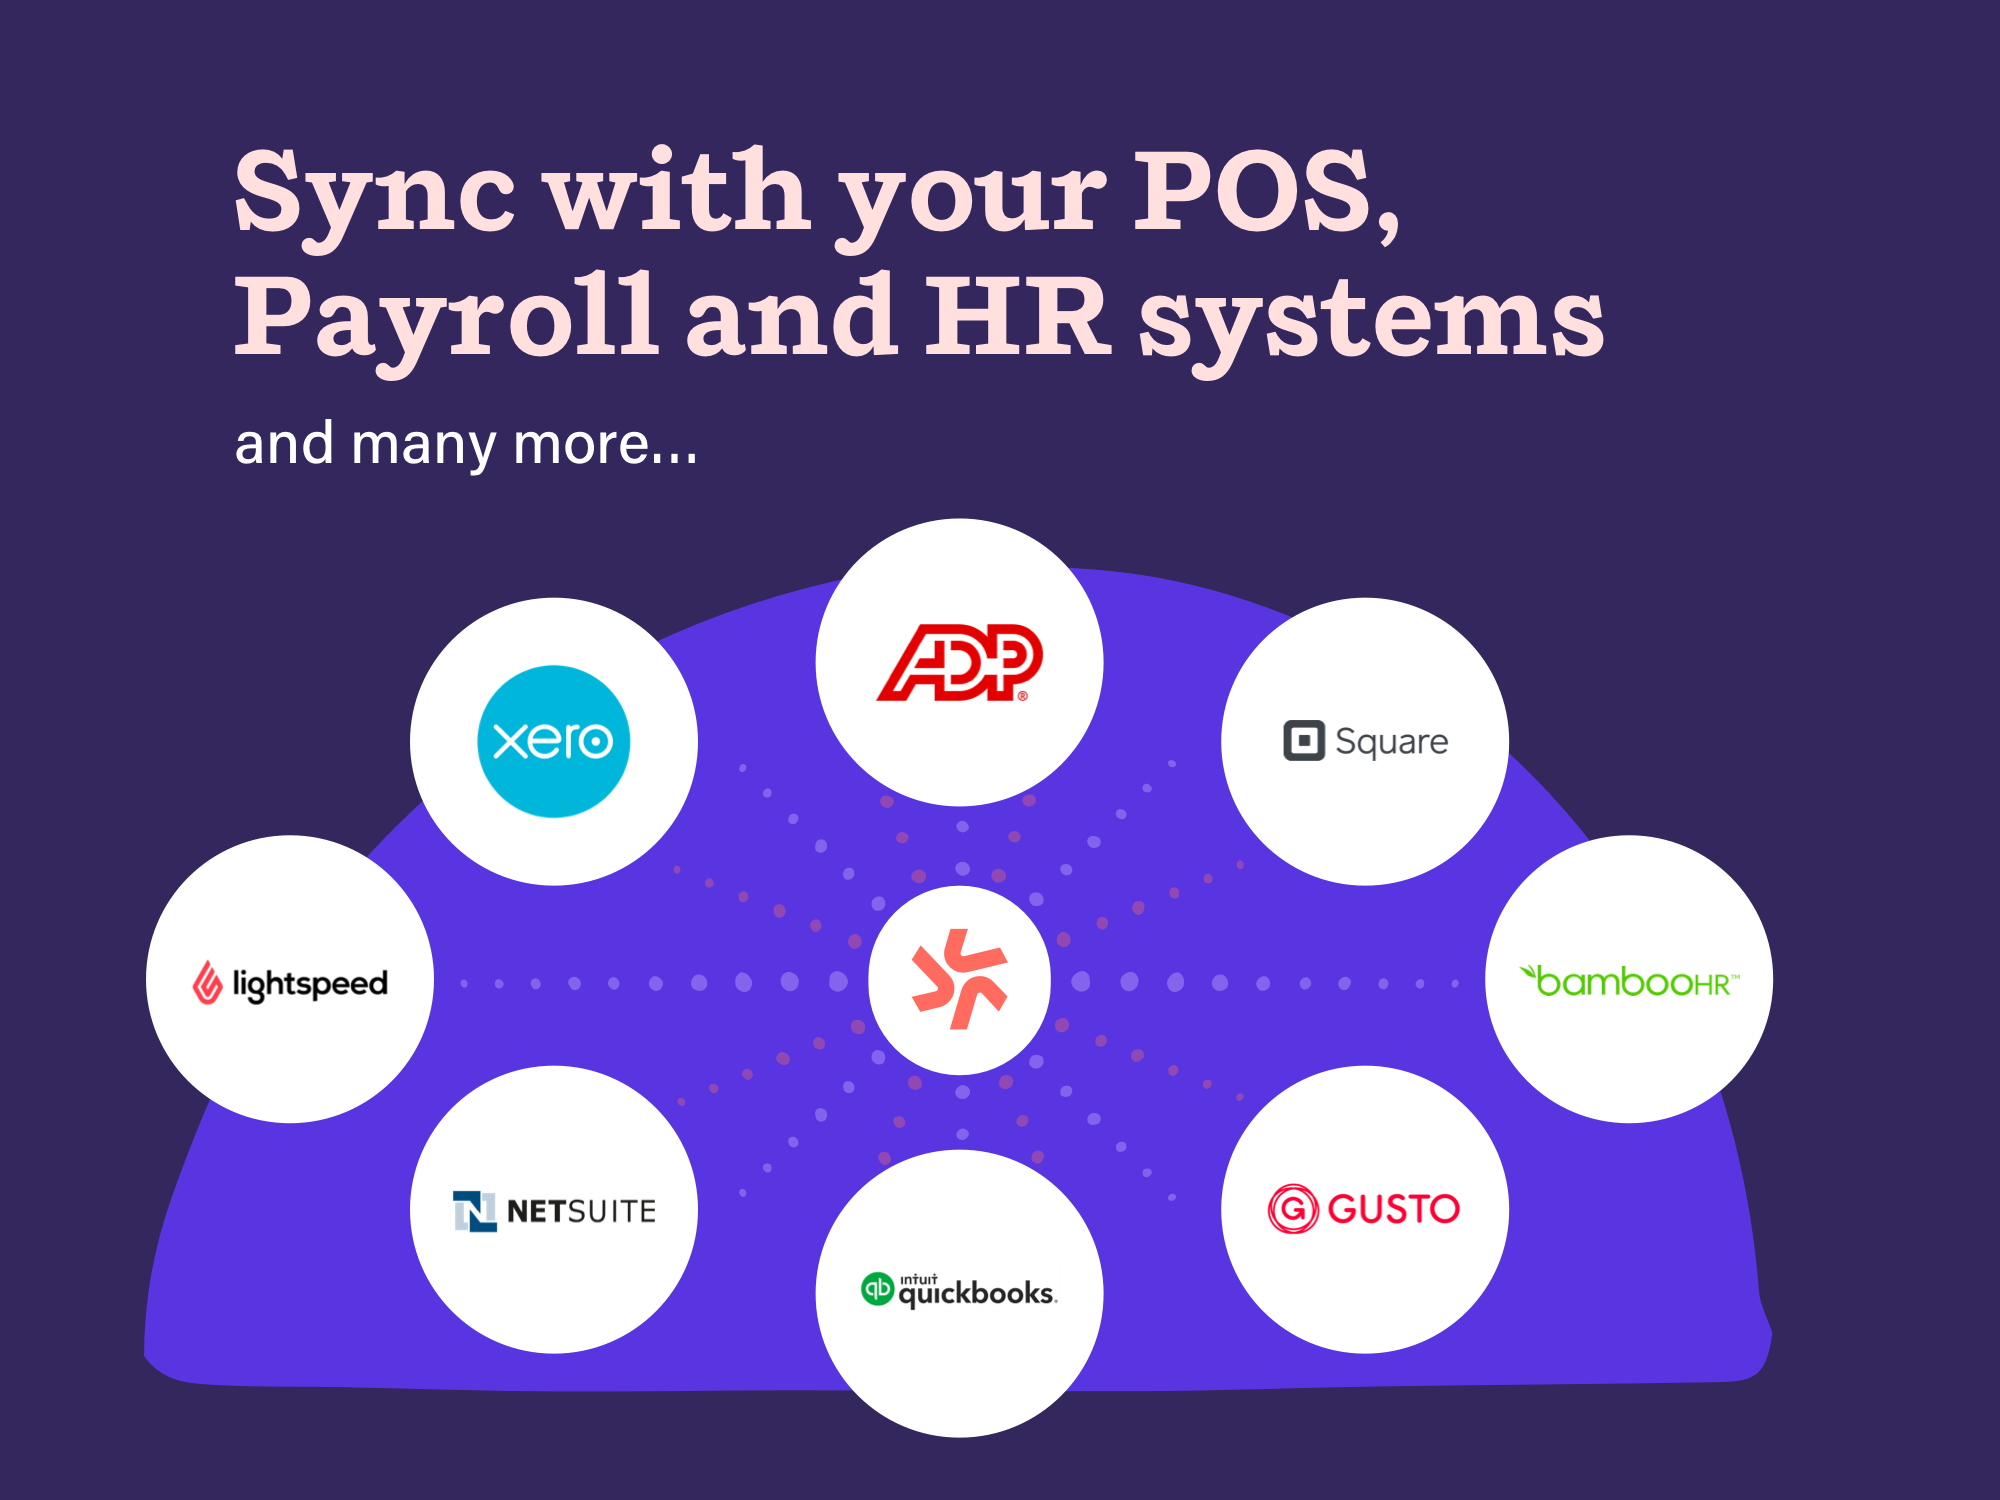 Deputy Software - Build a connected business: Deputy integrates with your Point of Sale, HR & Payroll Providers.